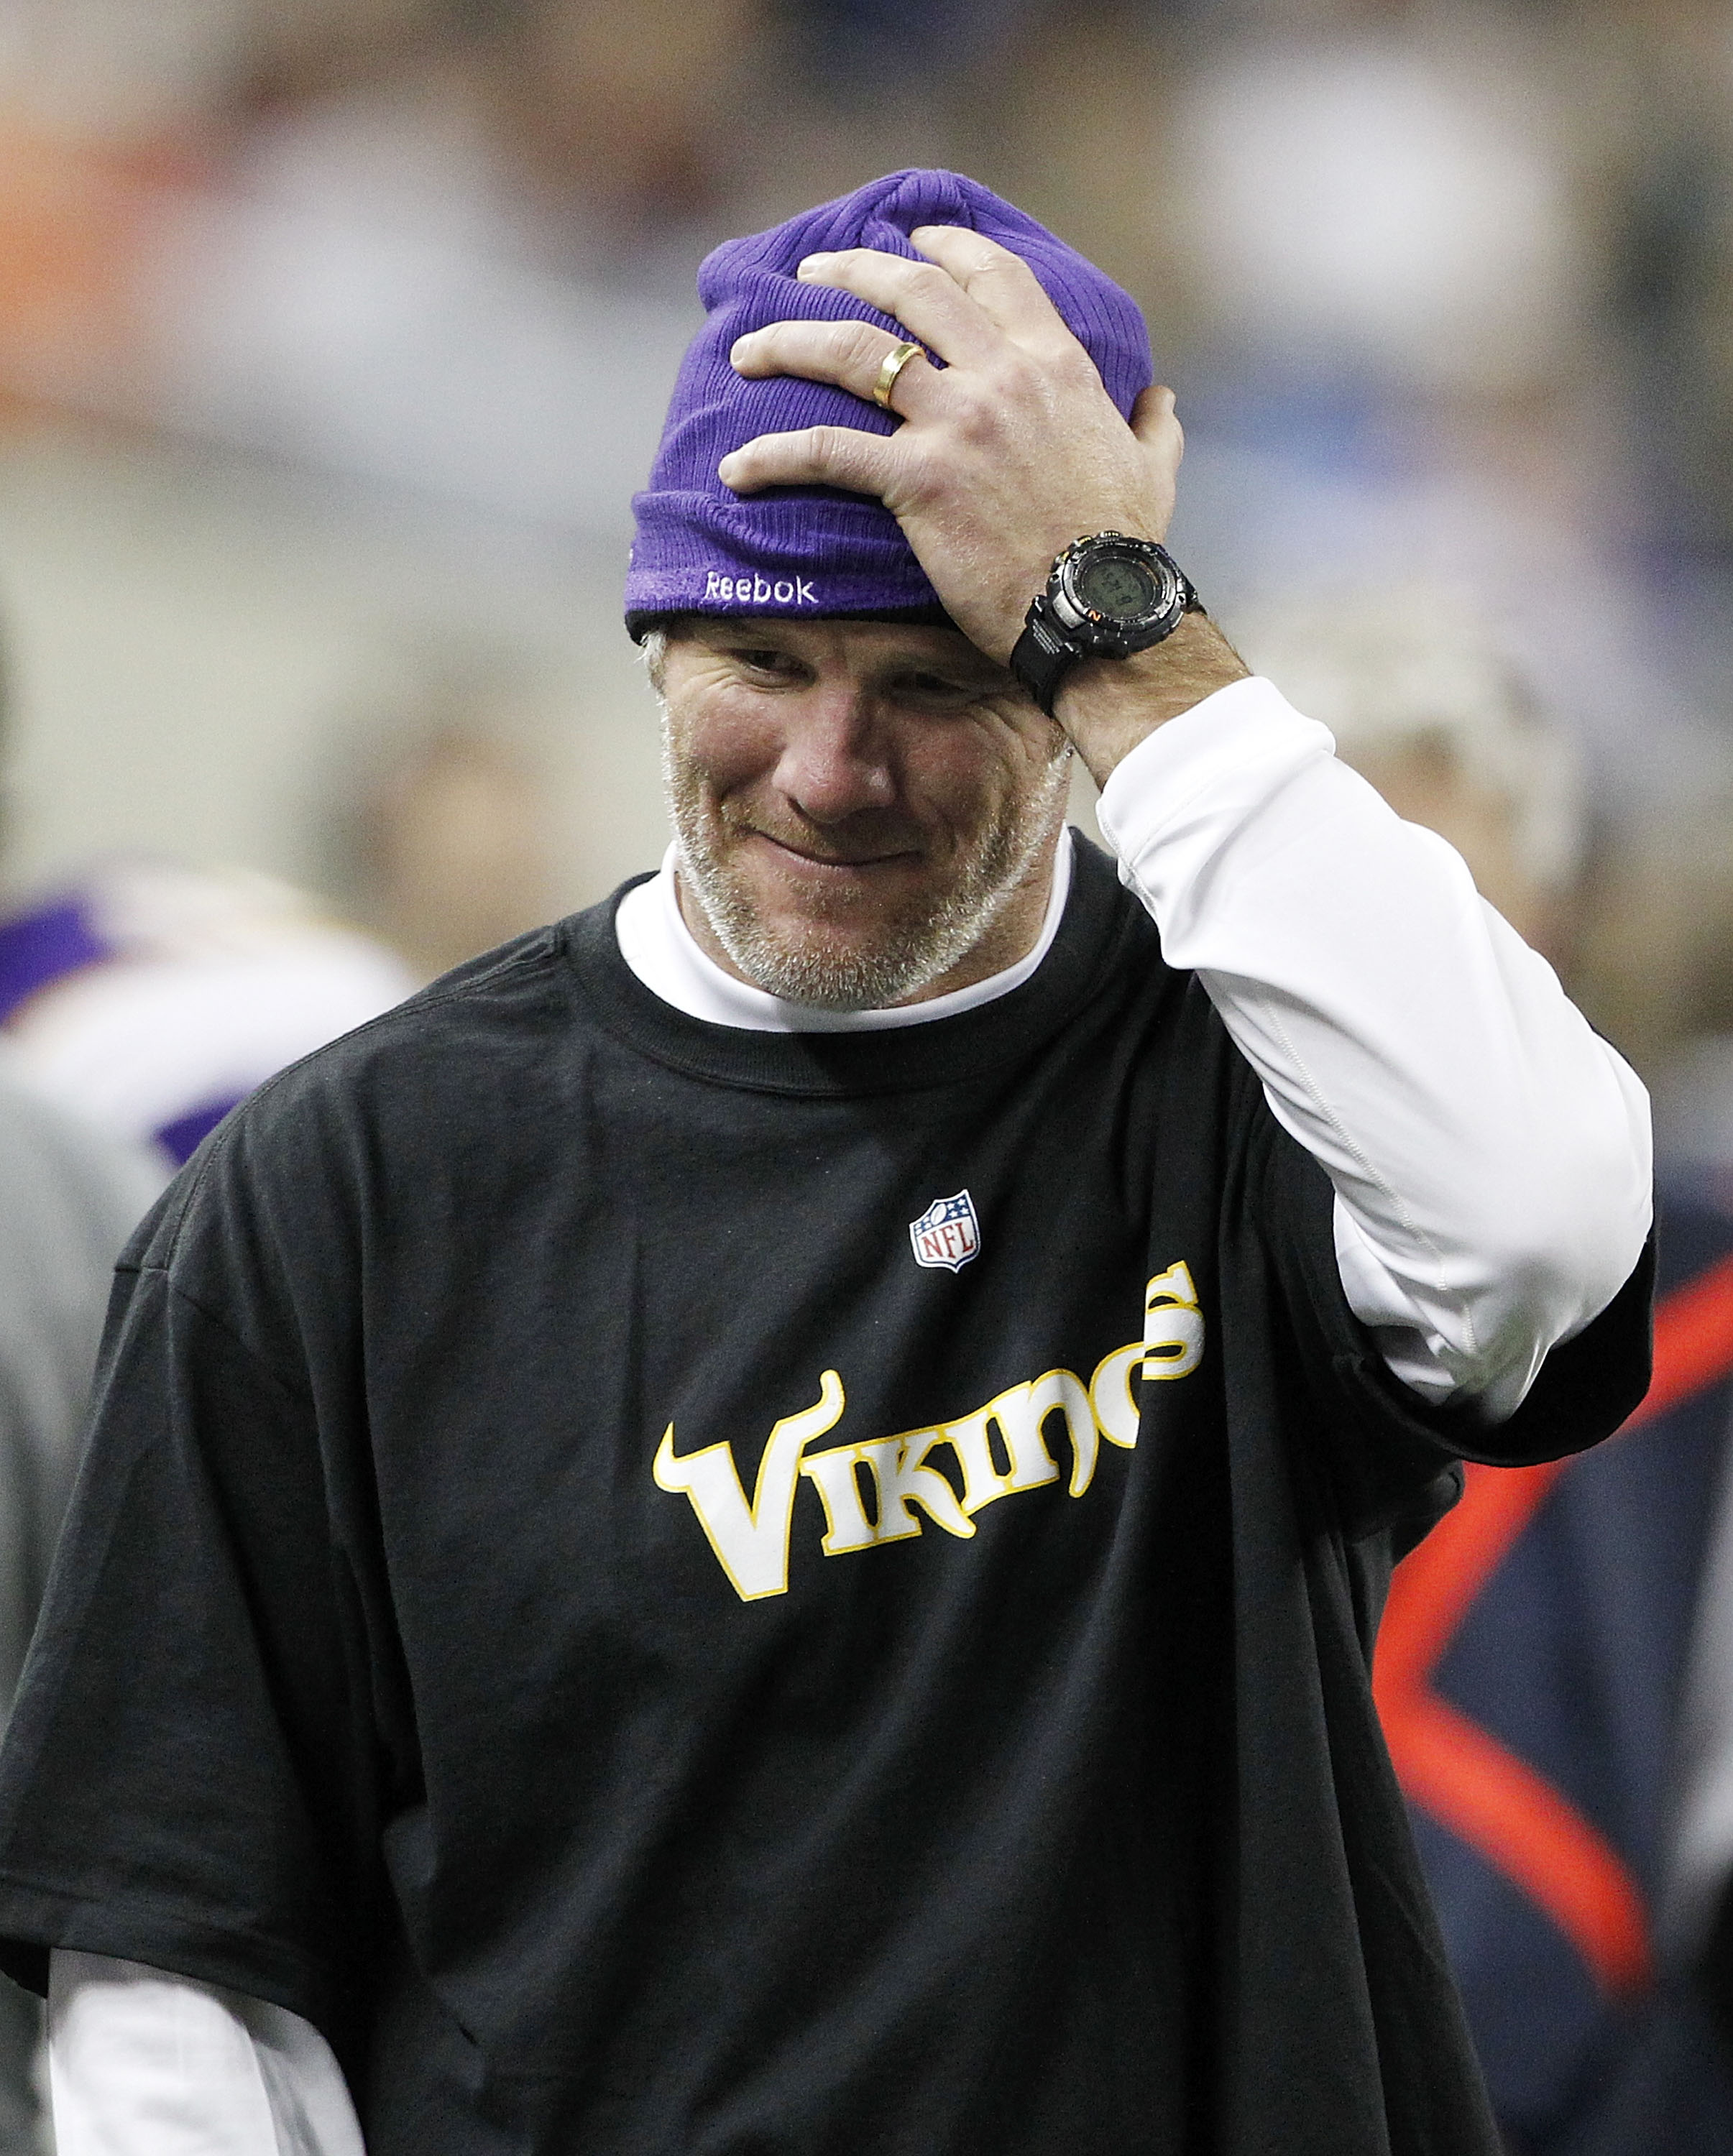 DETROIT - DECEMBER 13:  Quarterback Brett Favre #4 of the Minnesota Vikings puts his hand on his head during the game against the New York Giants at Ford Field on December 13, 2010 in Detroit, Michigan. The Giants defeated the Vikings 21-3.  (Photo by Leo